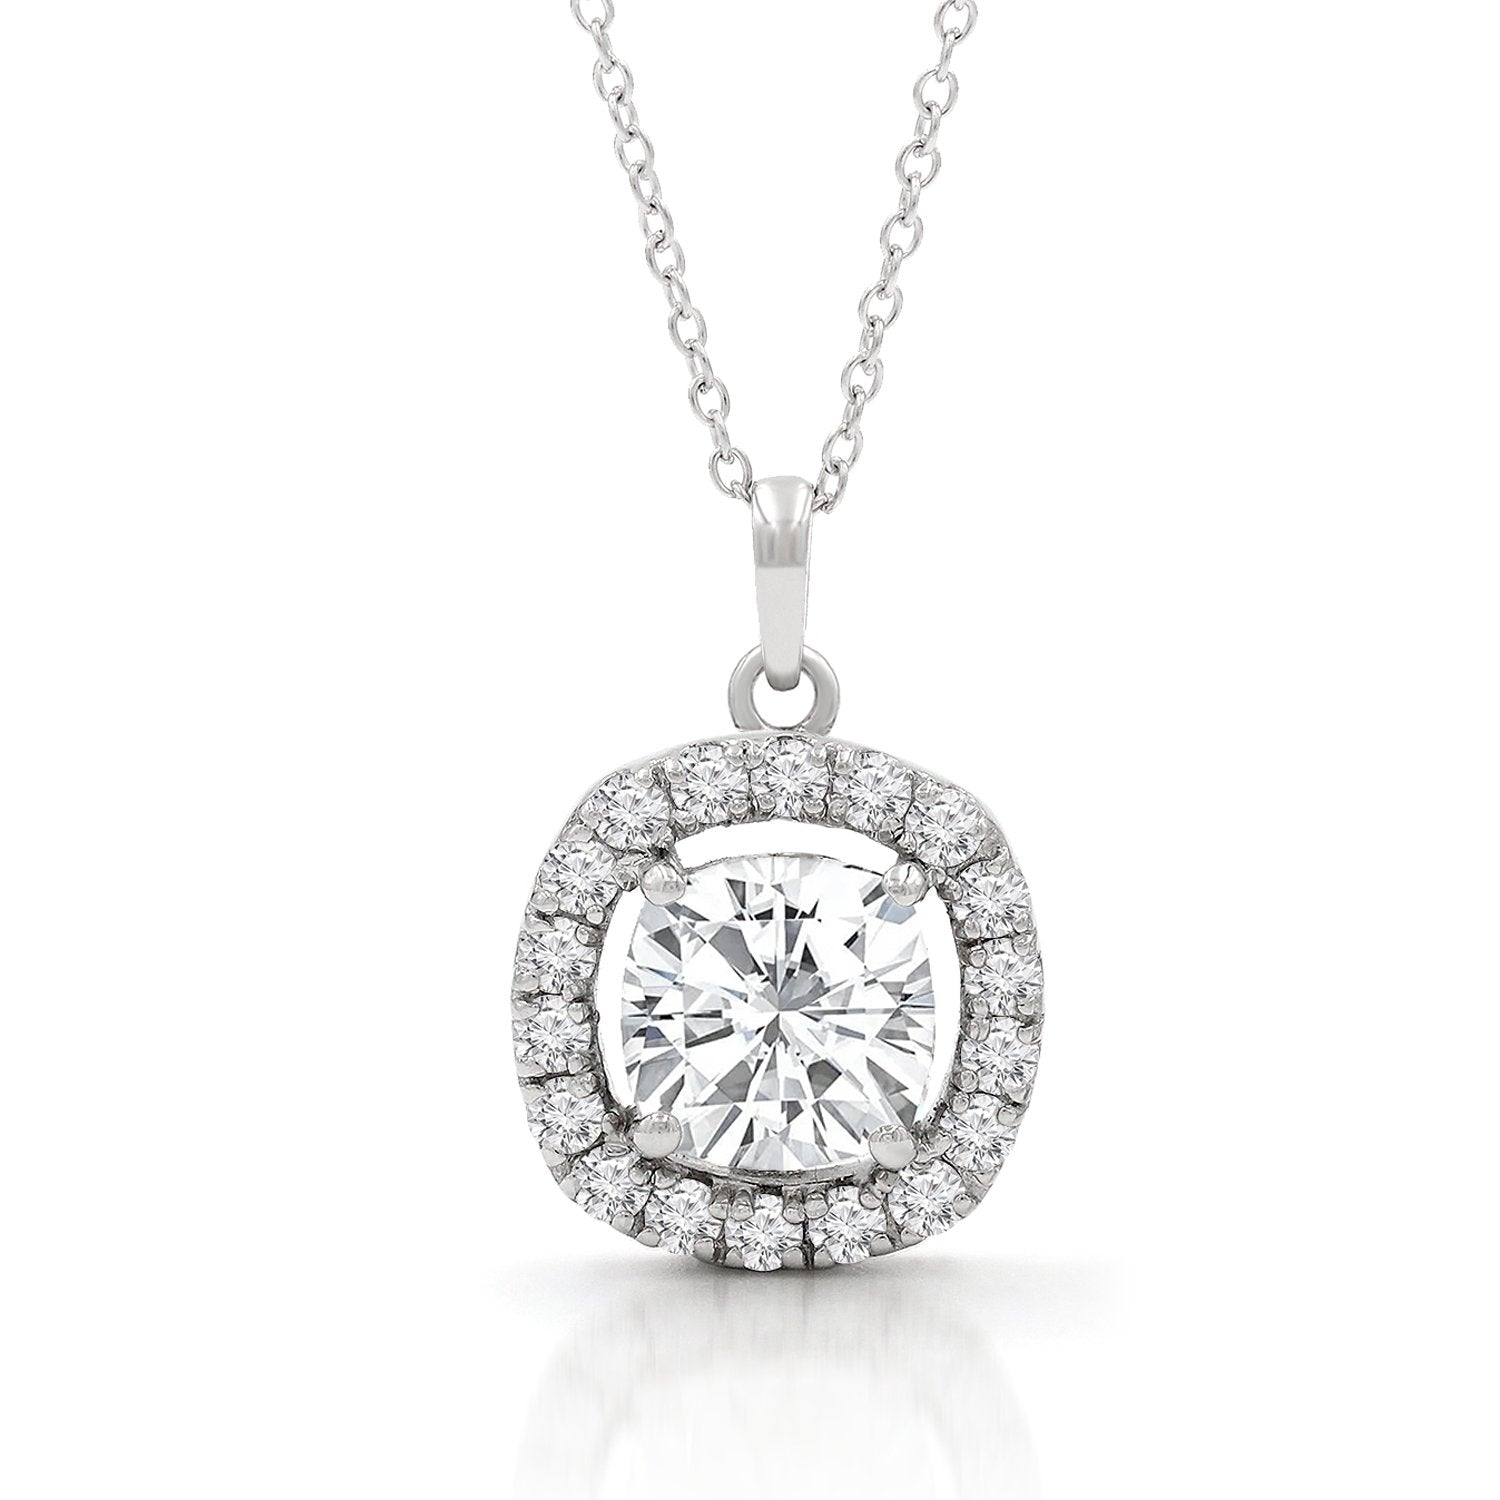 2.70 CTTW Moissanite Cushion Cut Halo Pendant Necklace in 925 Sterling Silver